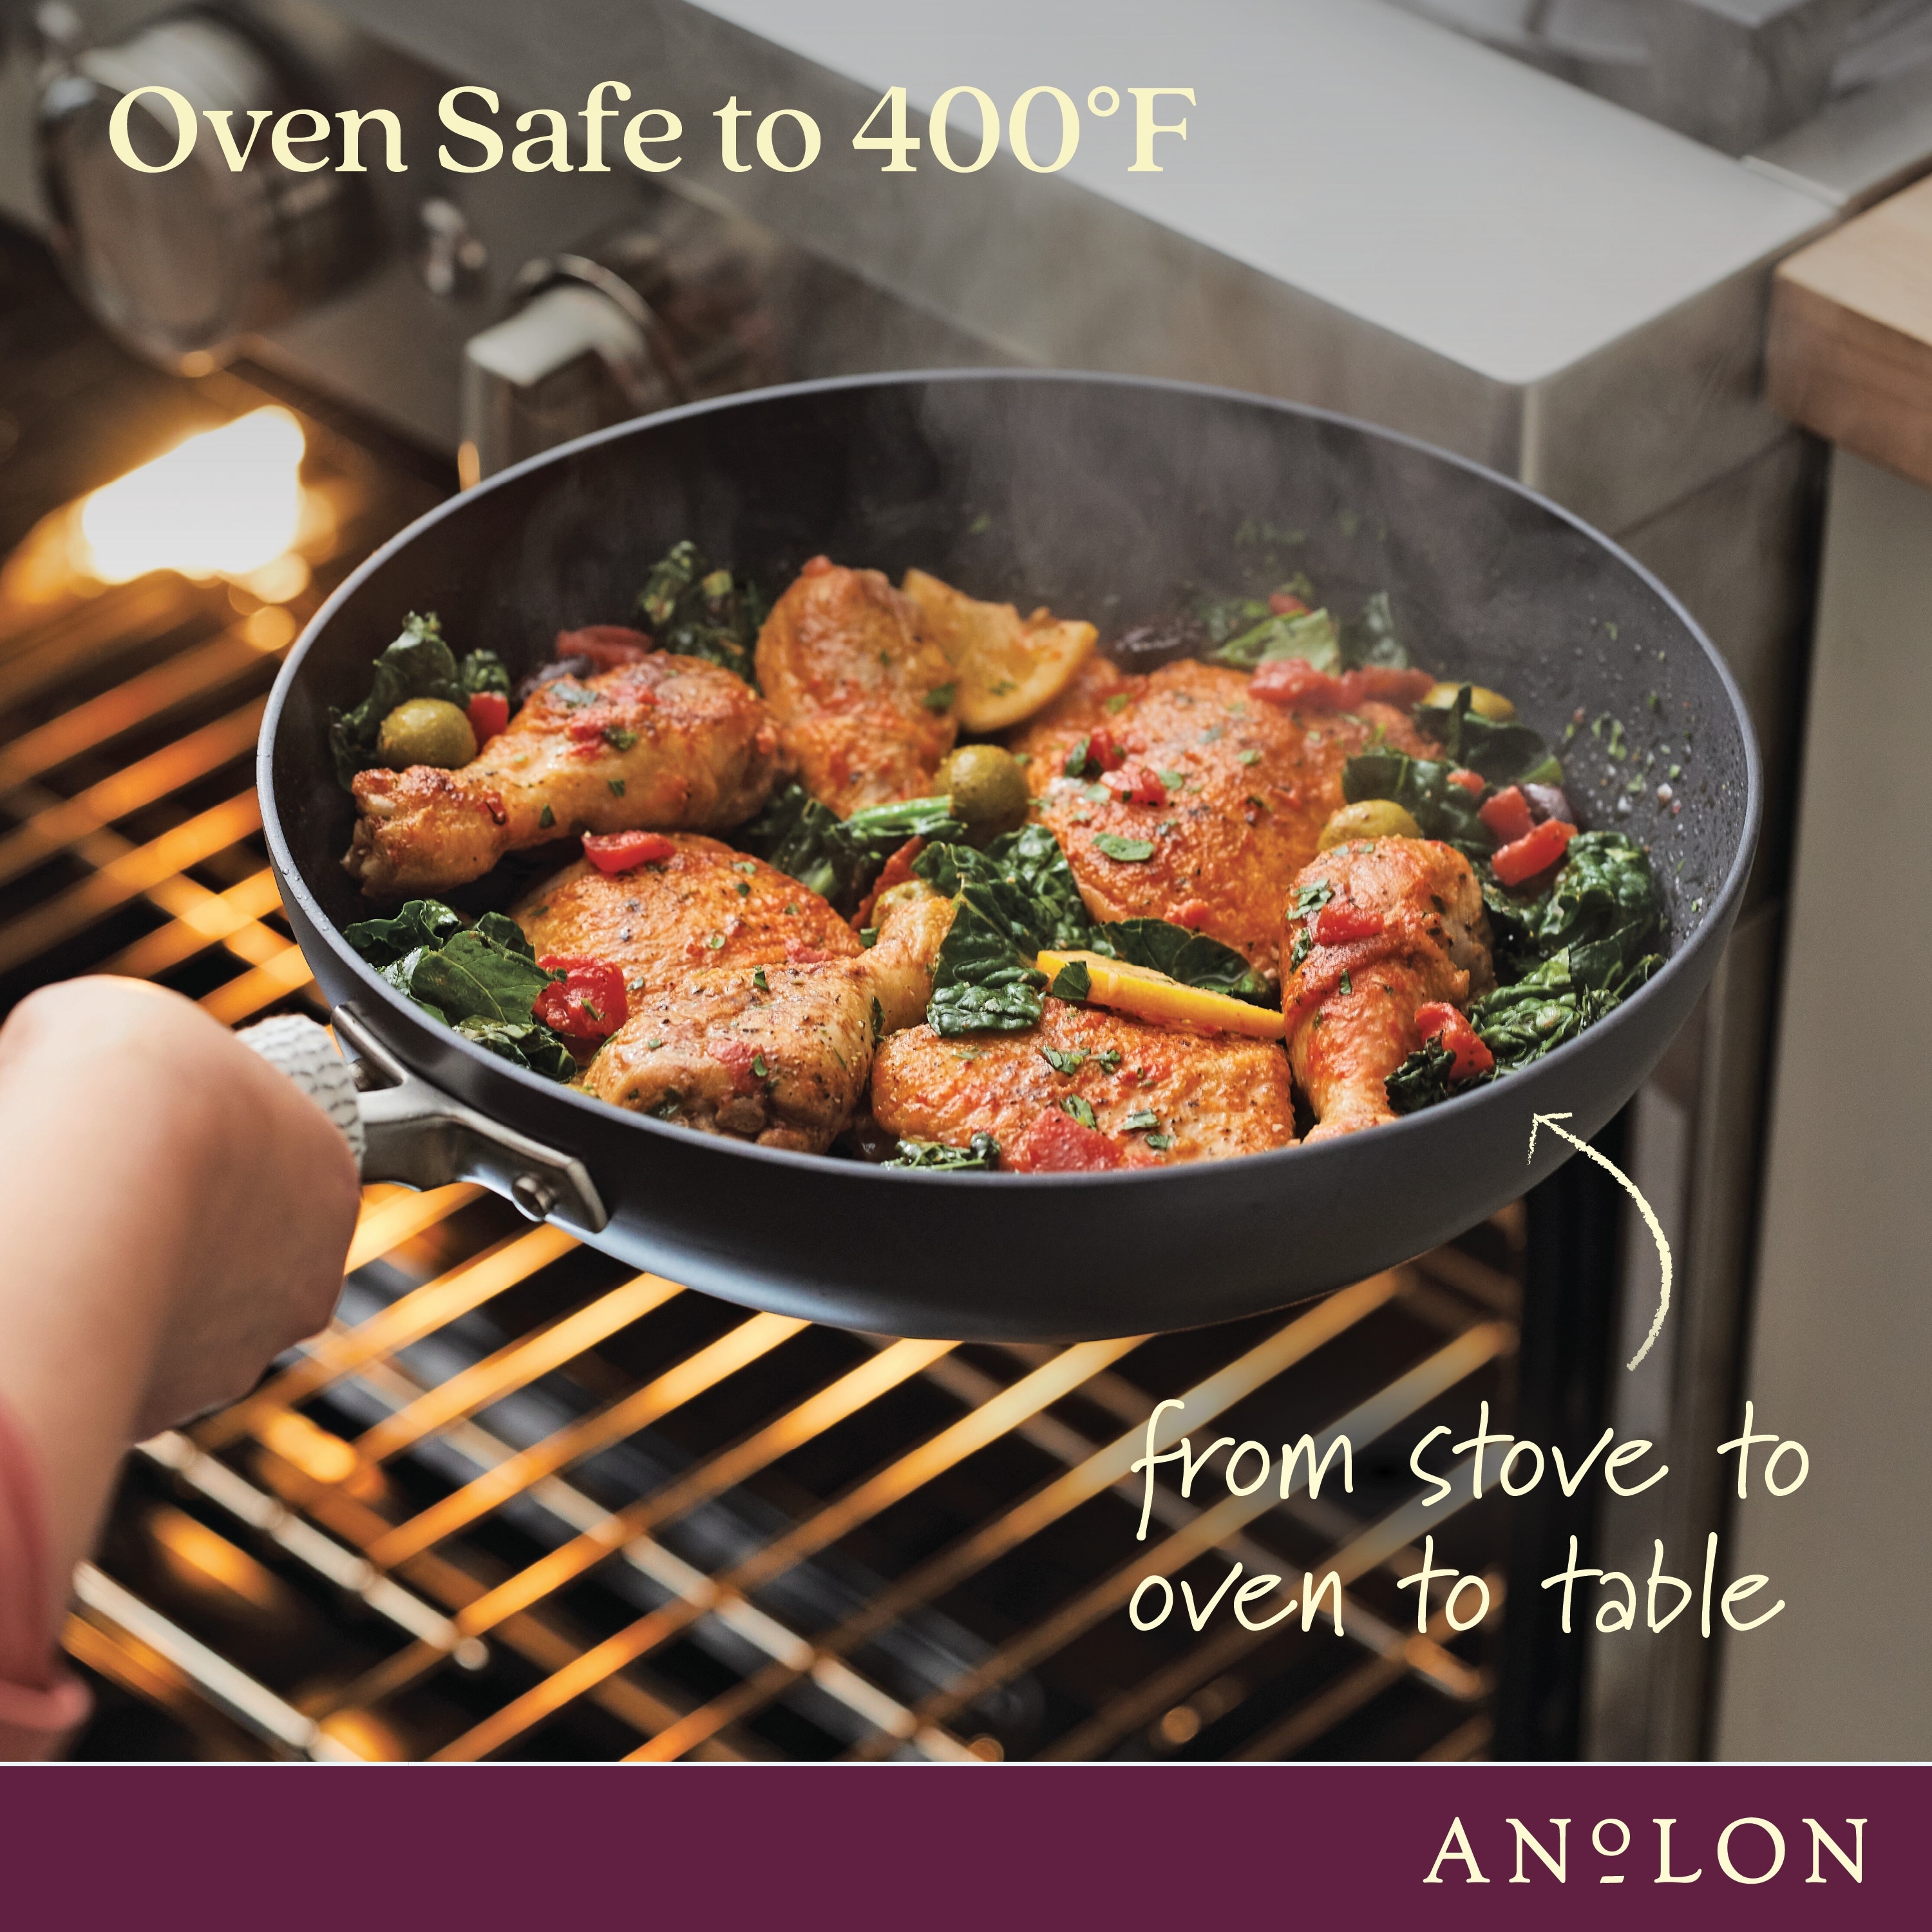 https://ak1.ostkcdn.com/images/products/is/images/direct/ec40c6b95cbef62625d11de0ed927e967b4aabf7/Anolon-Advanced-Hard-Anodized-Nonstick-Ultimate-Pan-with-Lid%2C-12-Inch%2C-Gray.jpg